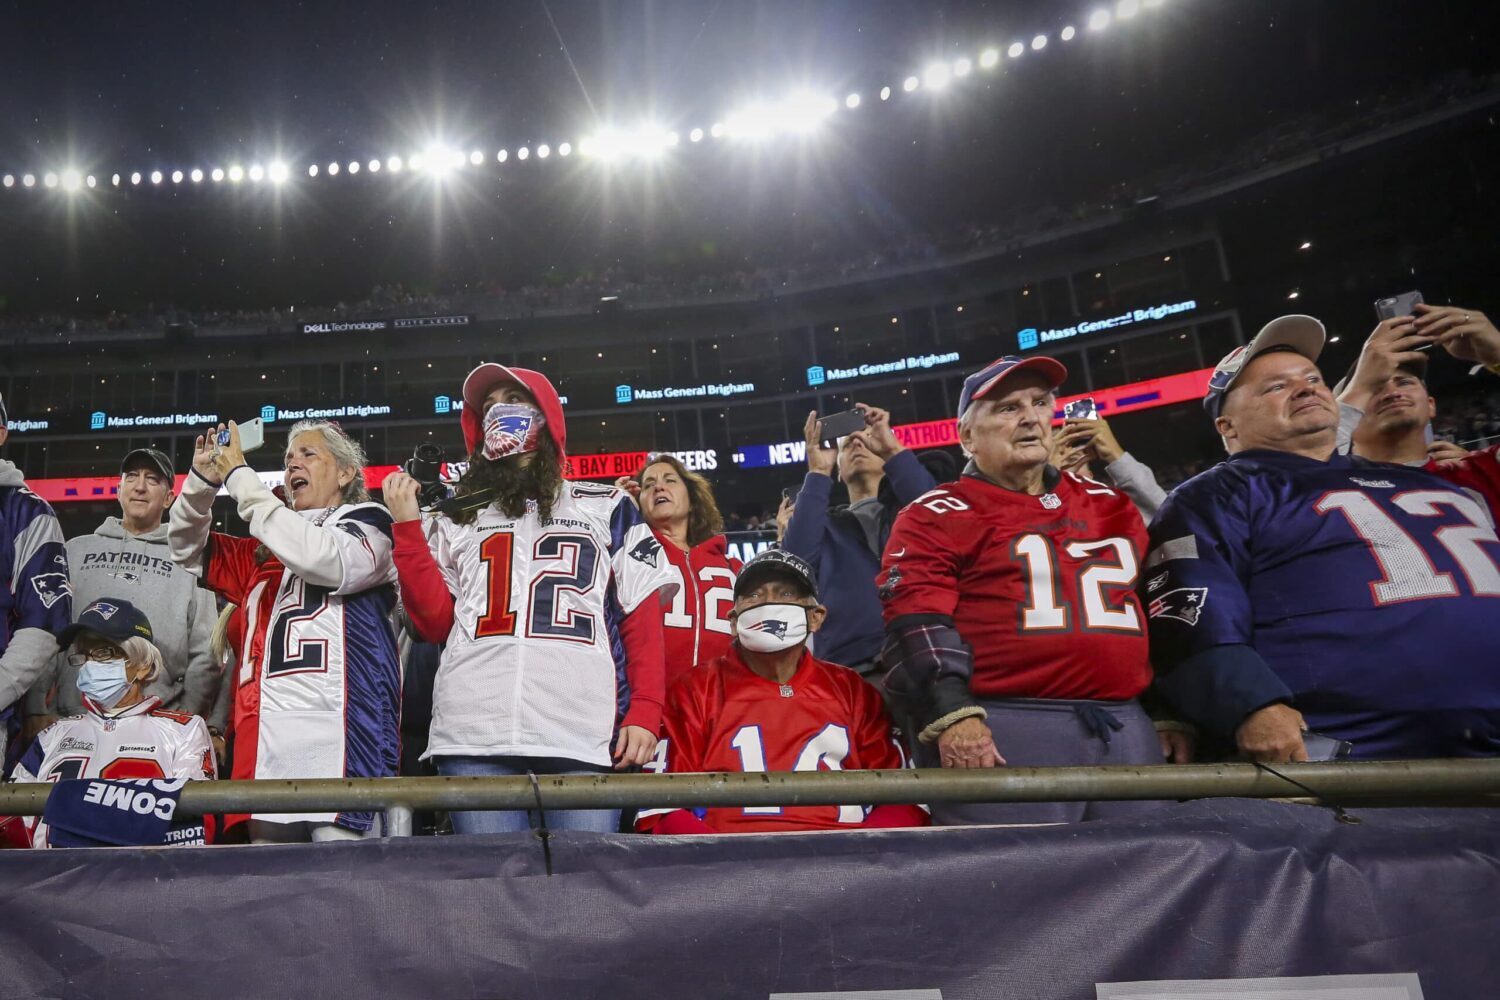 Patriot fans taking in an NFL game.